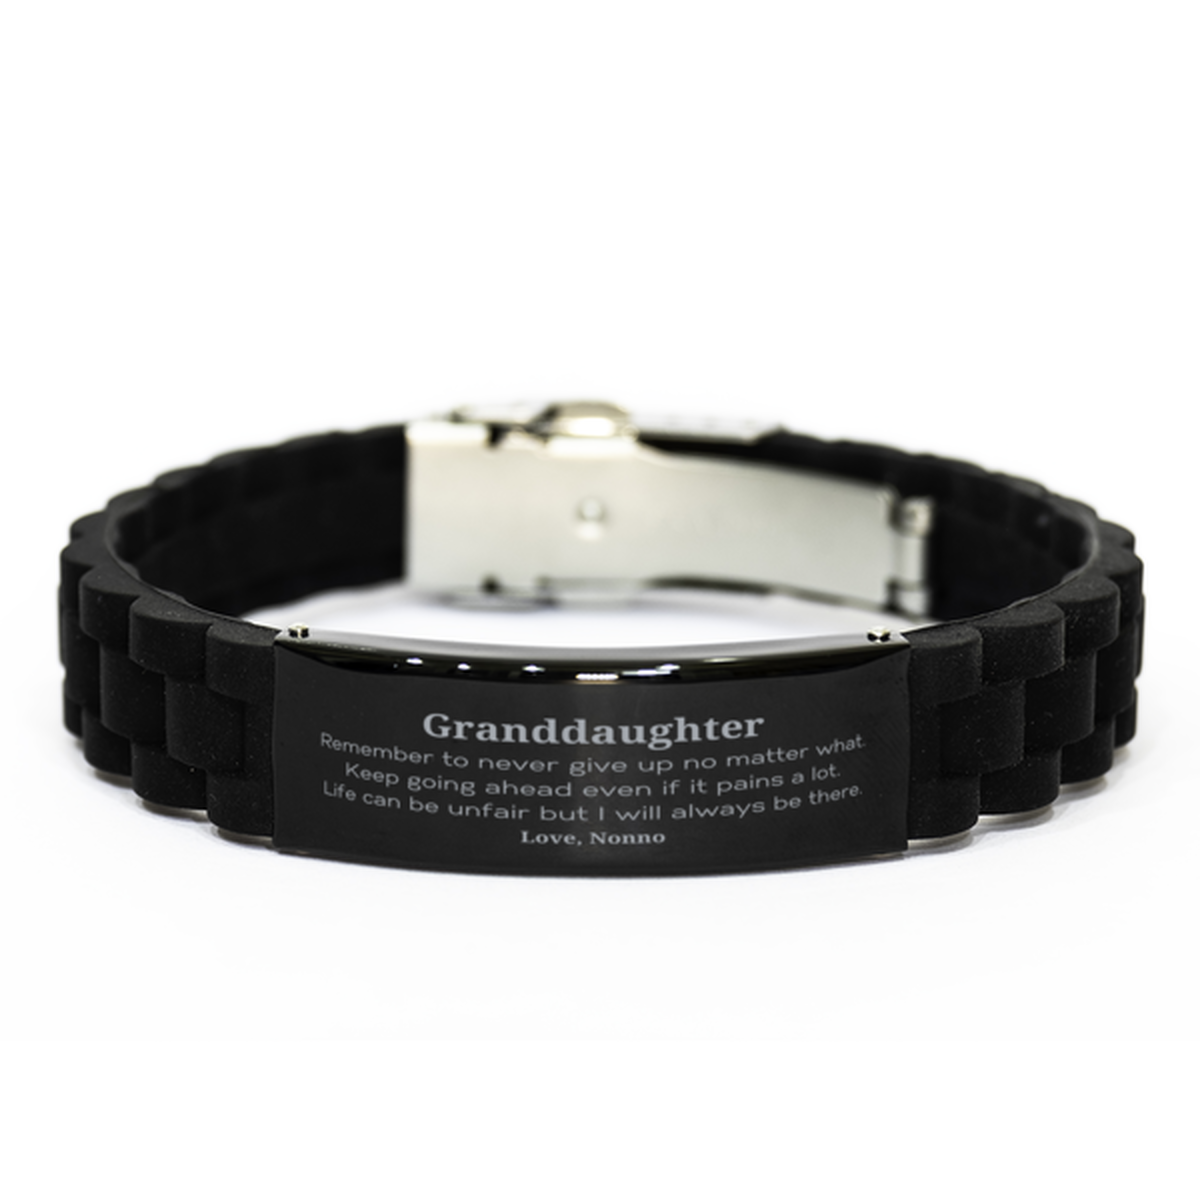 Granddaughter Motivational Gifts from Nonno, Remember to never give up no matter what, Inspirational Birthday Black Glidelock Clasp Bracelet for Granddaughter